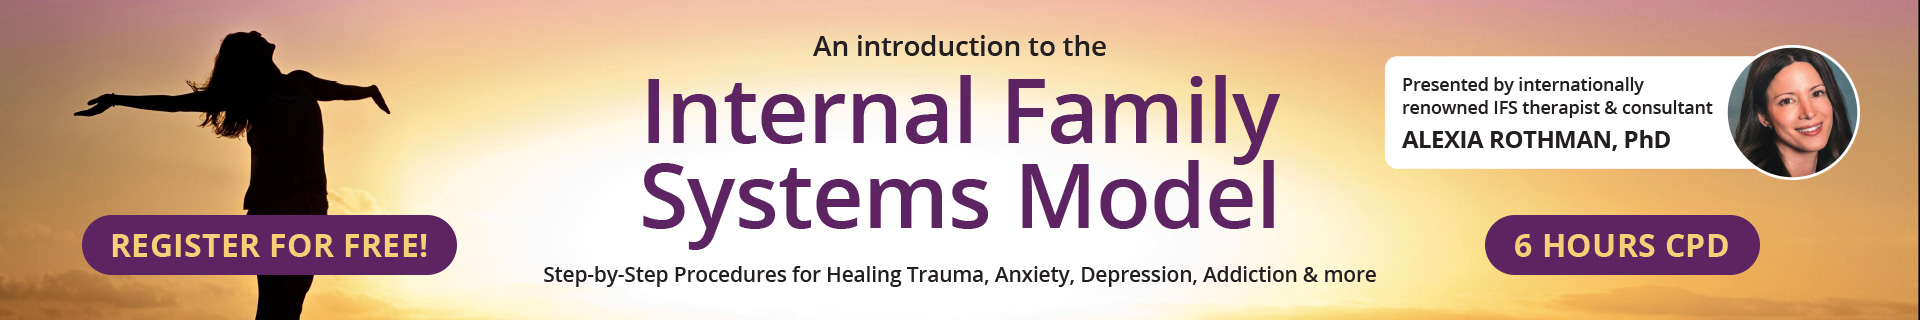 An introduction to the Internal Family Systems Model: Step-by Step Procedures for Healing Trauma, Anxiety, Depression, Addiction & more